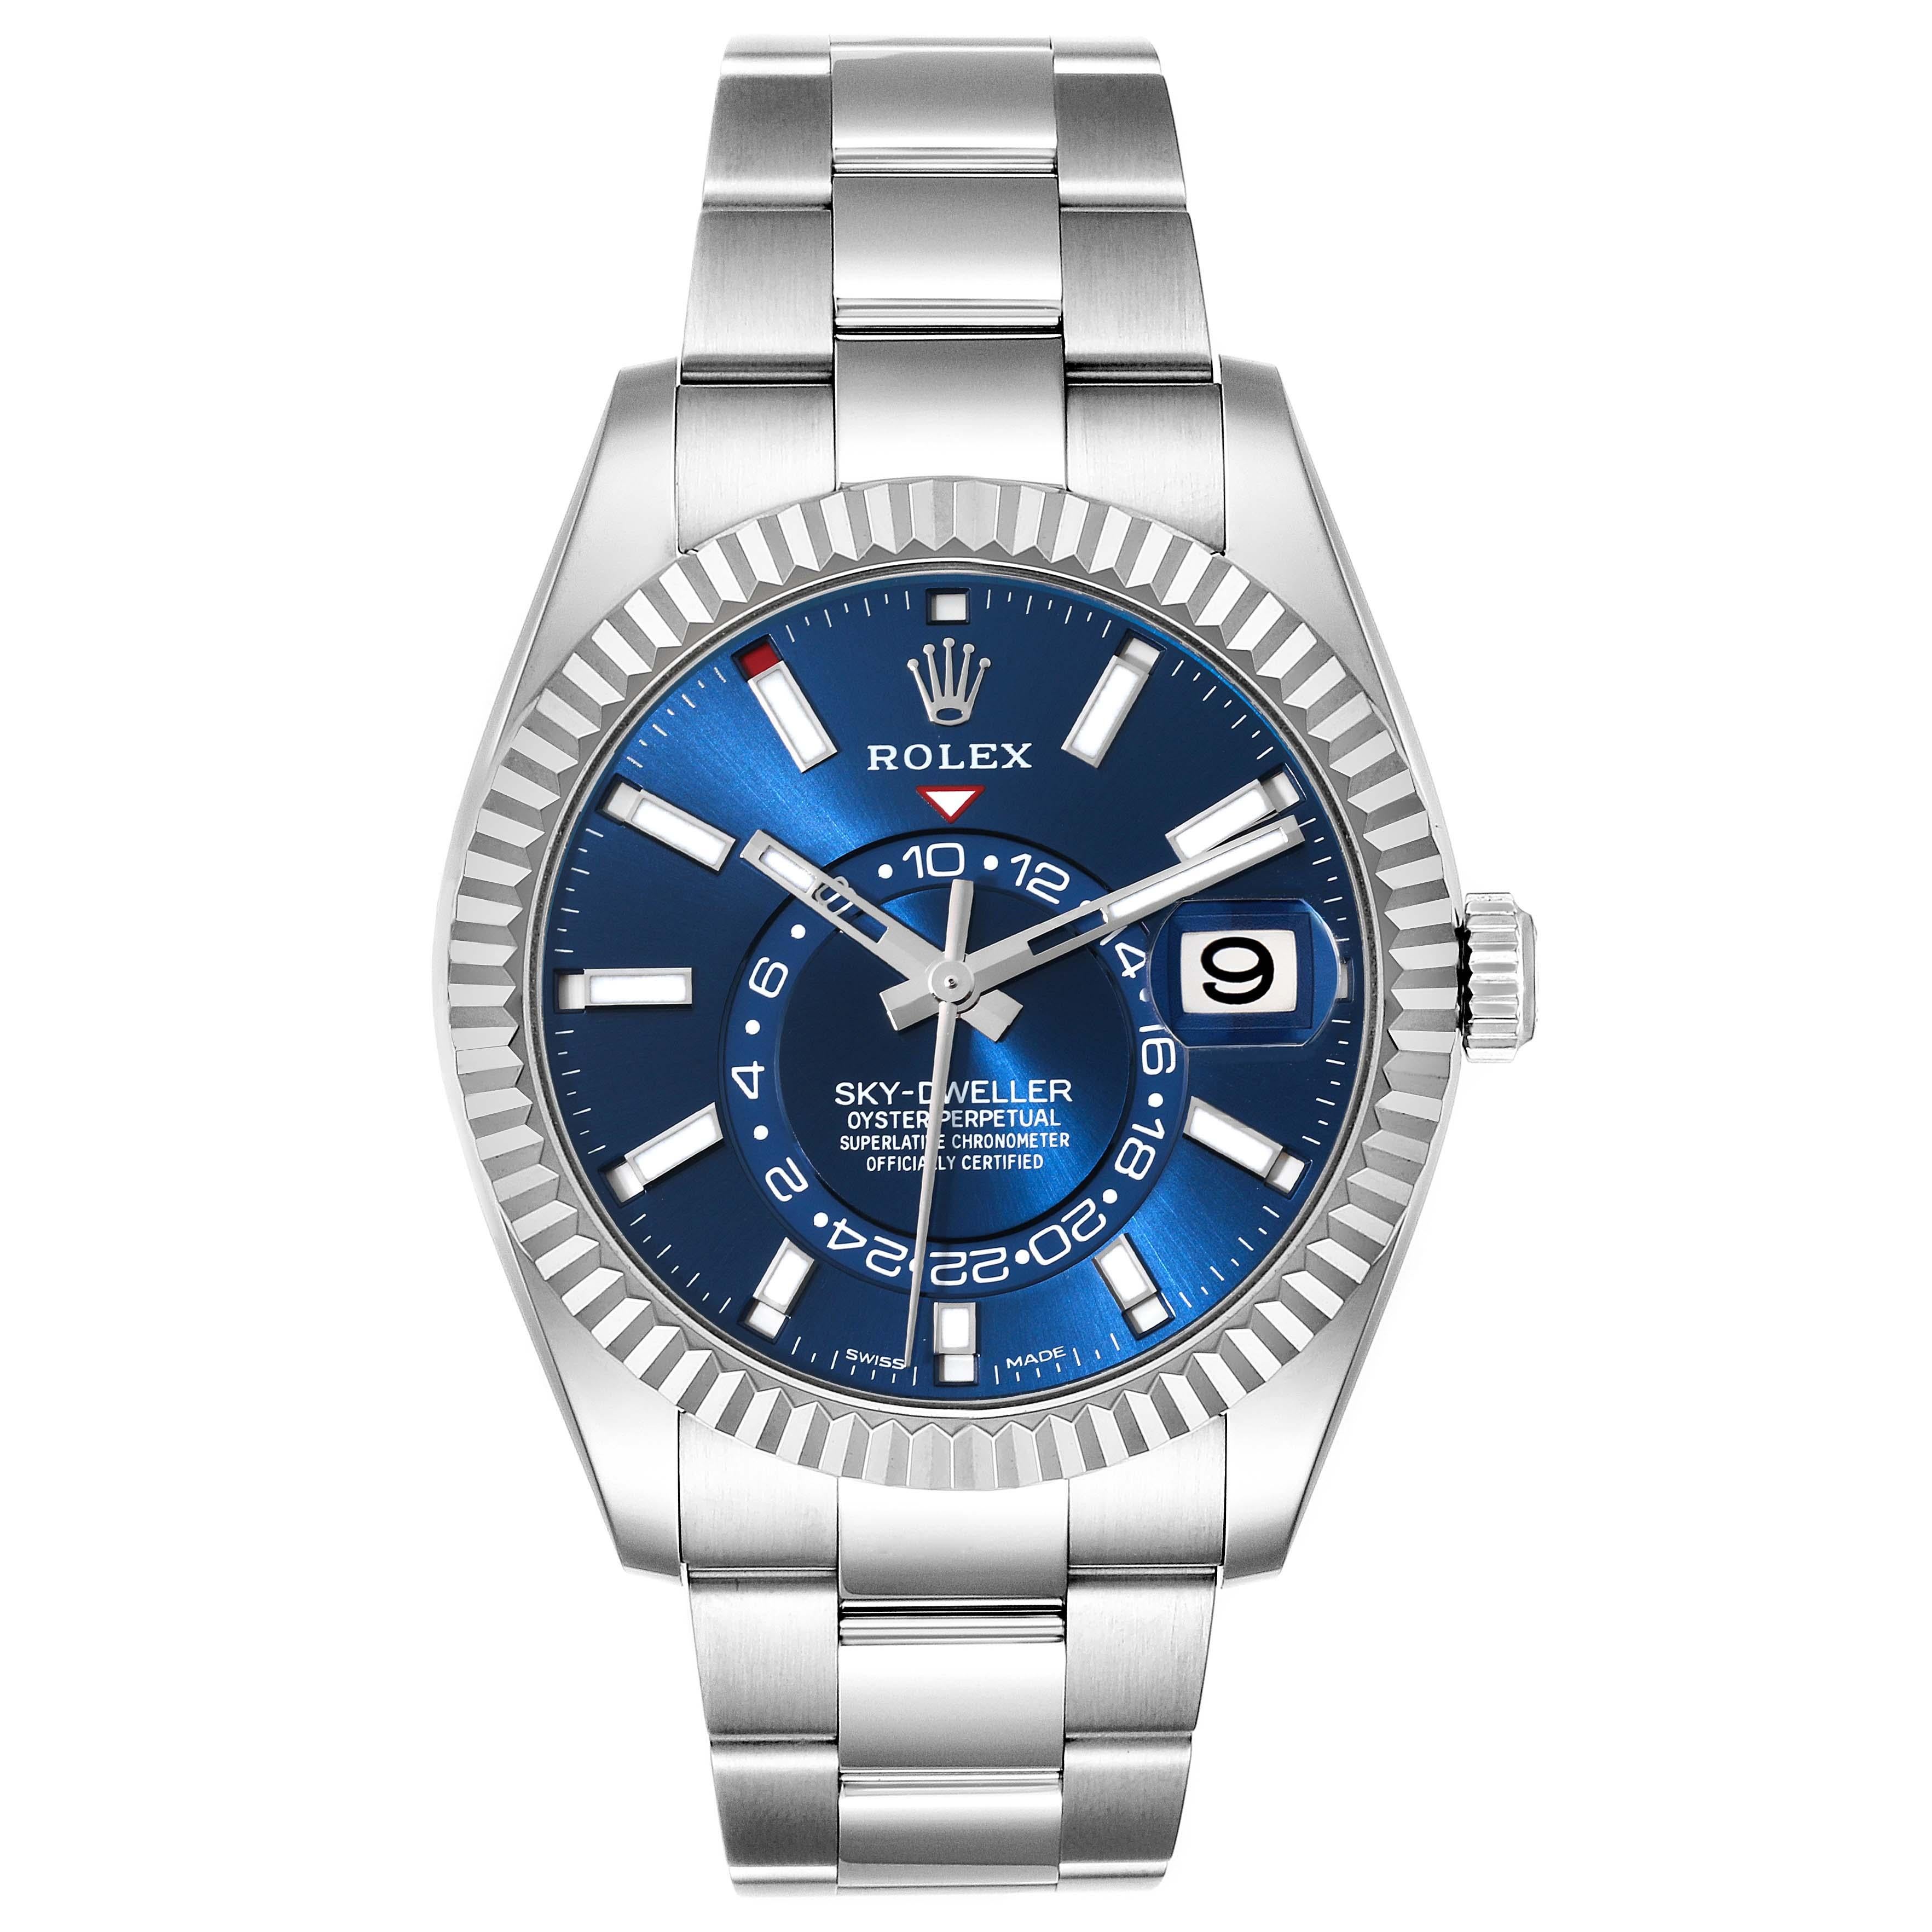 Rolex Sky-Dweller Blue Dial Steel White Gold Mens Watch 326934 Box Card. Officially certified chronometer automatic self-winding movement. Dual time zones, annual calendar. Paramagnetic blue Parachrom hairspring. High-performance Paraflex shock